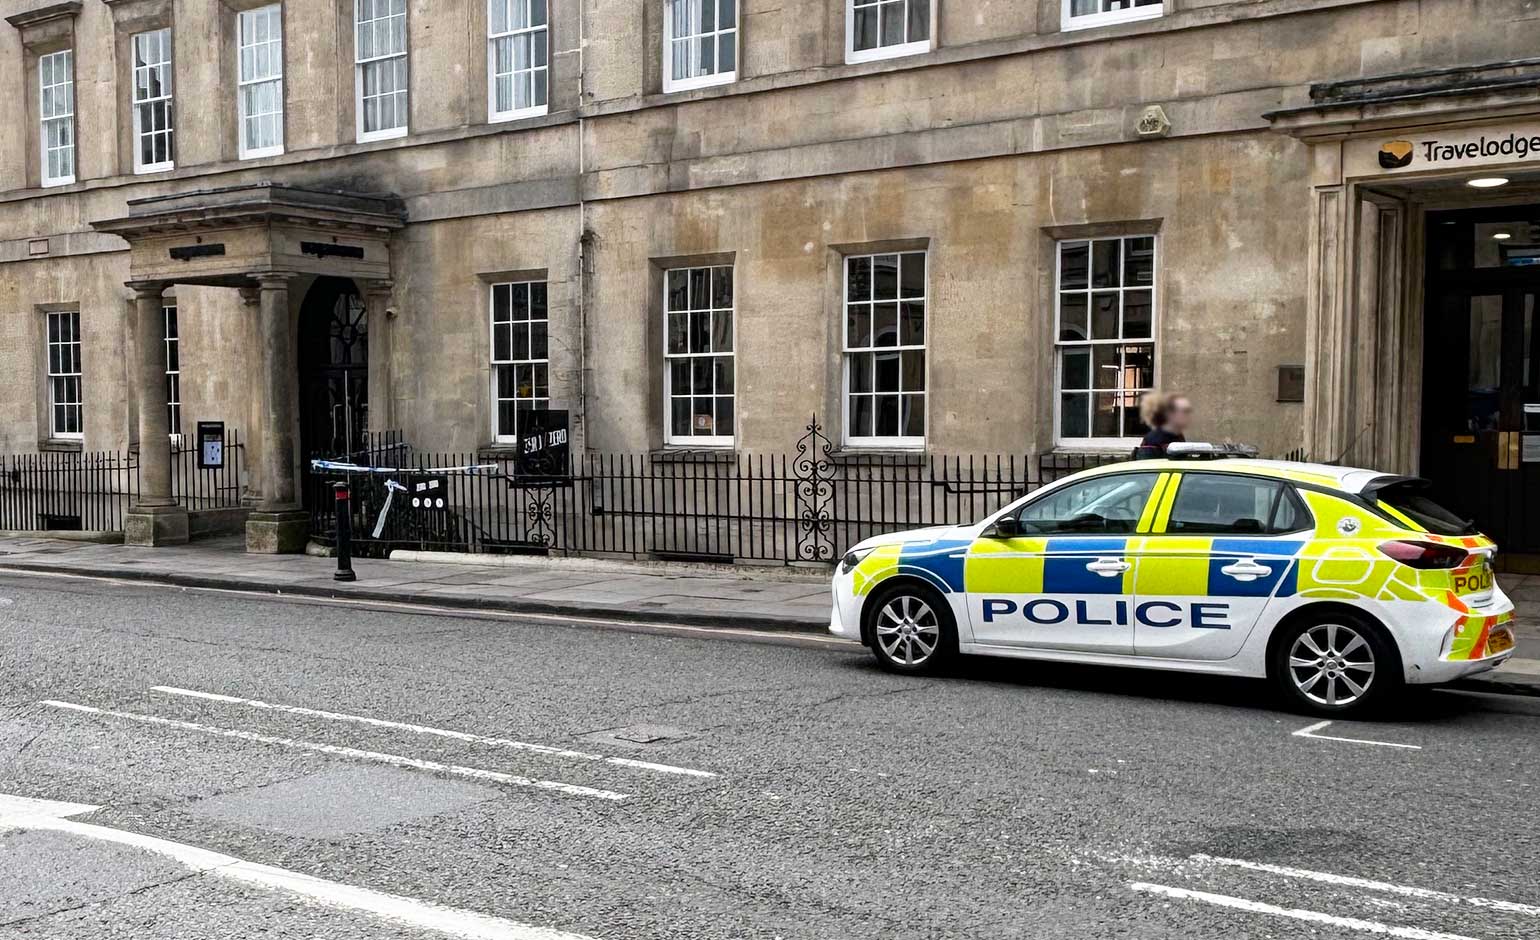 Two women ‘seriously sexually assaulted’ at nightclub in Bath